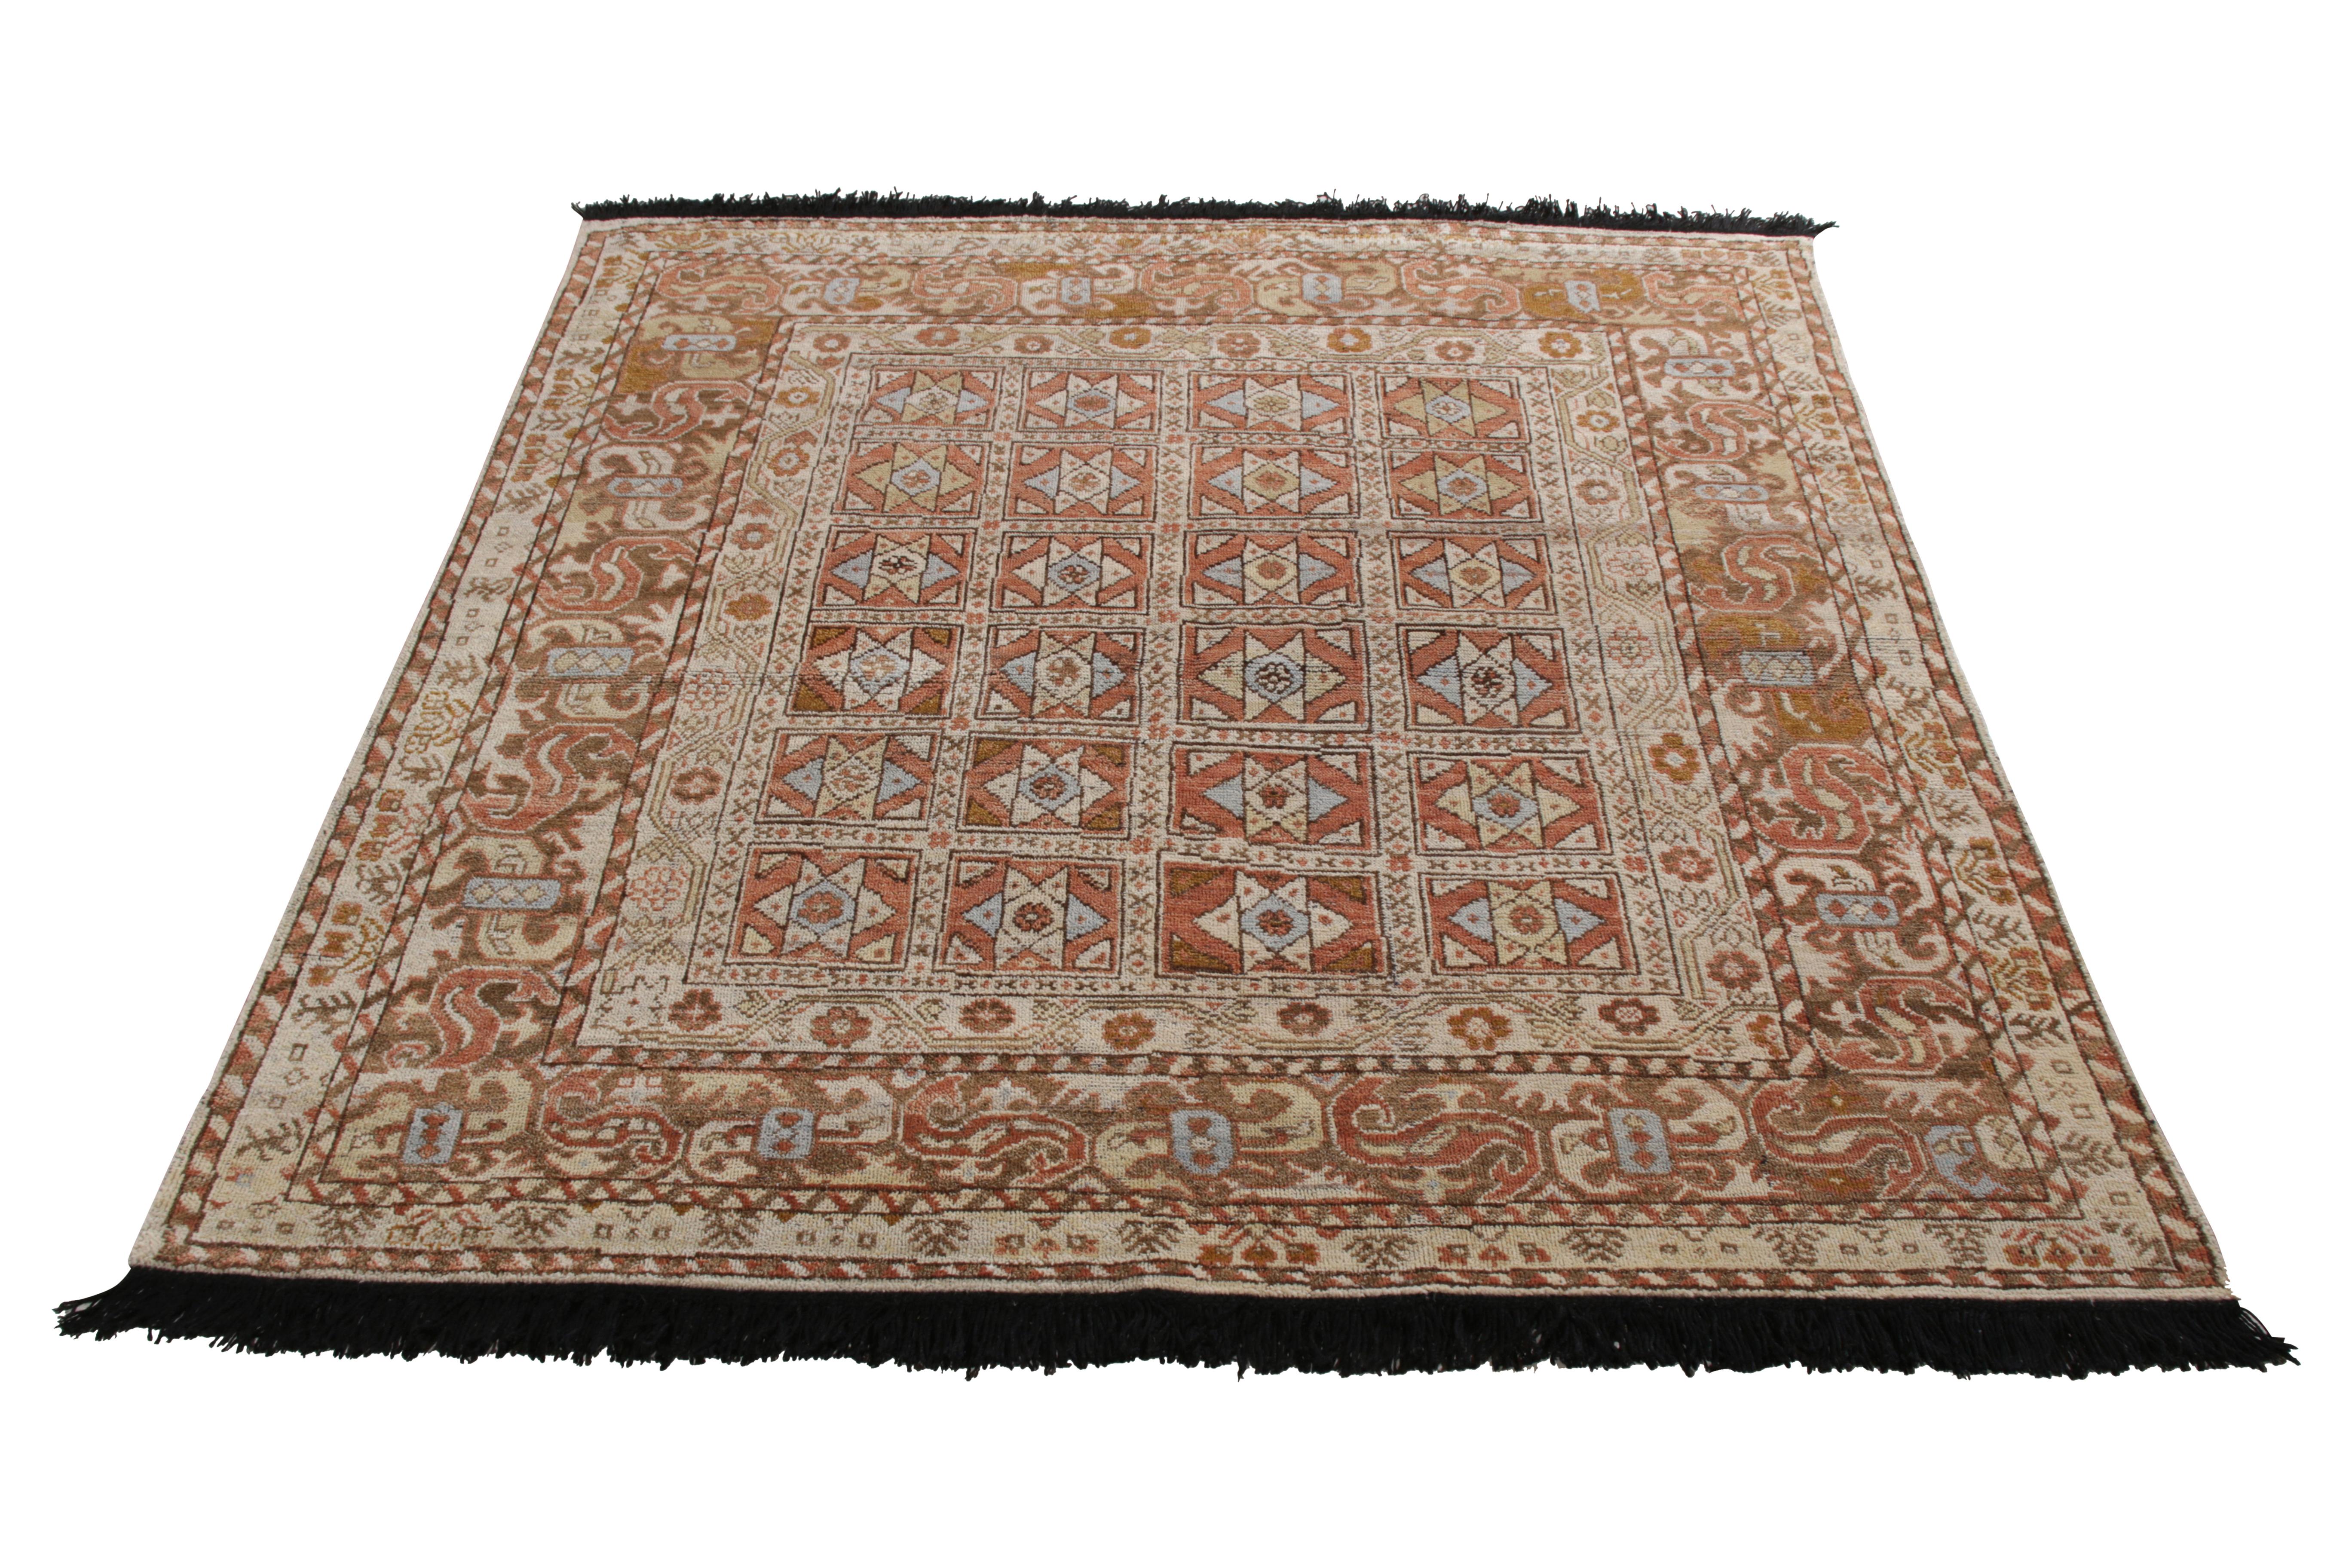 A 6x6 ode to celebrated tribal rug styles, from Rug & Kilim’s Burano Collection. 
Hand knotted in a soft Ghazni wool, enjoying beige-brown with pink-red accents throughout an all over geometric pattern. A gentle blue accent can be seen accenting